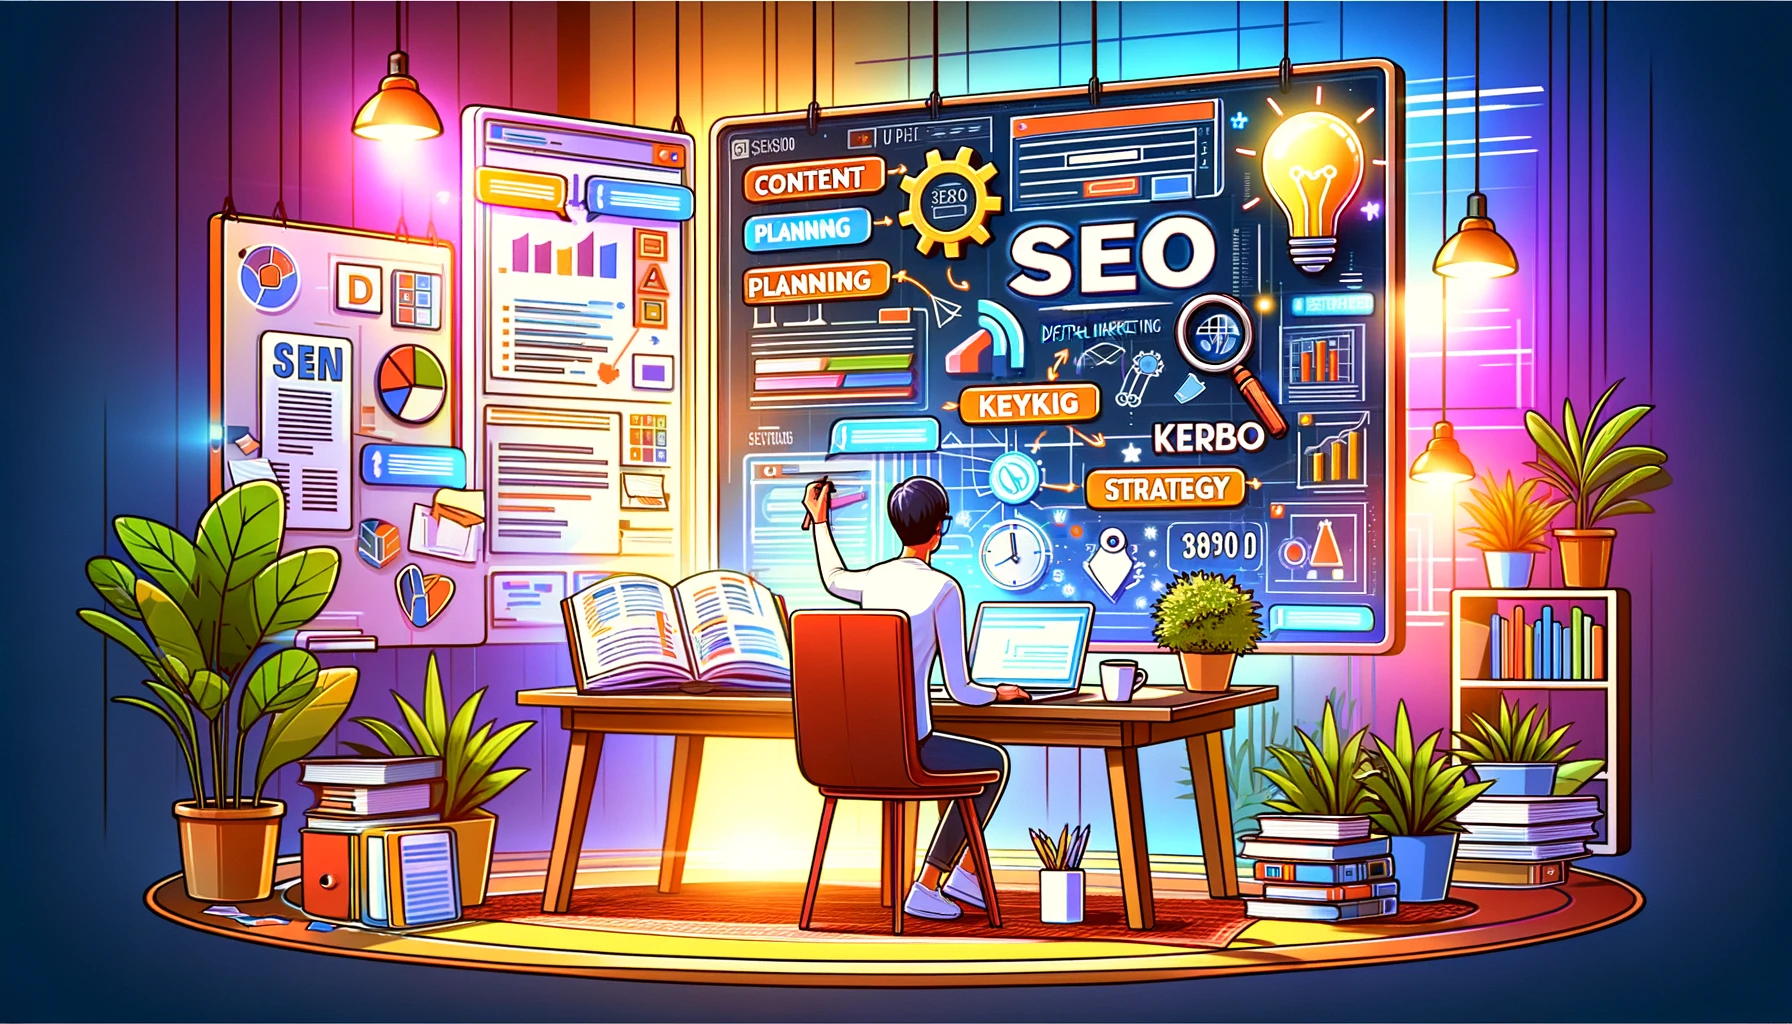 What includes the good SEO services for small businesses?